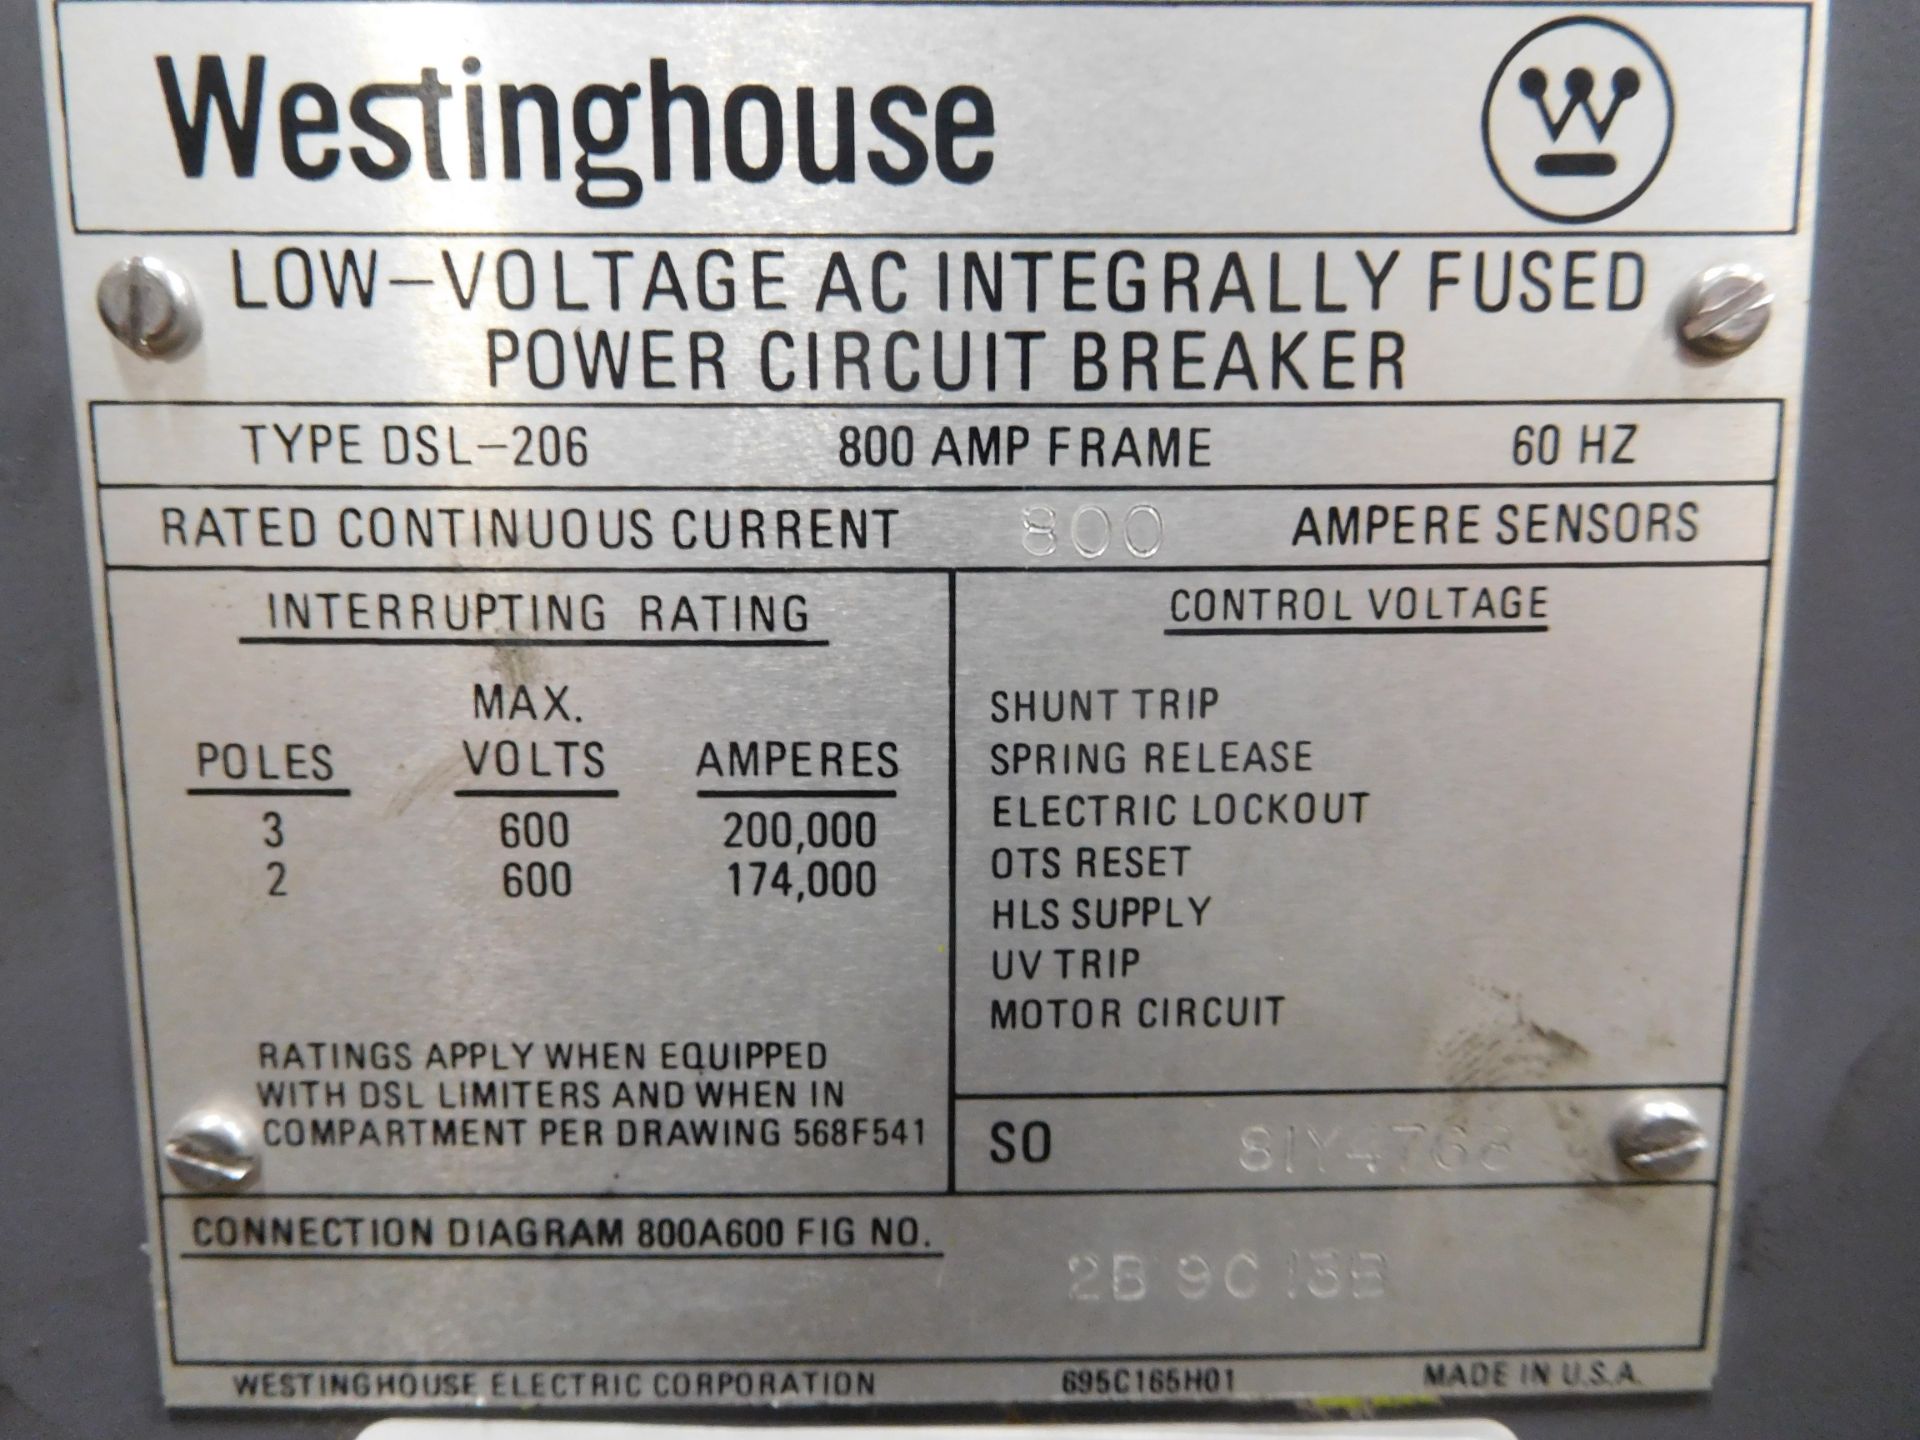 Westinghouse DSL-206 800 Amp Low-Voltage AC Integrally Fused Power Circuit Breaker - Image 2 of 10